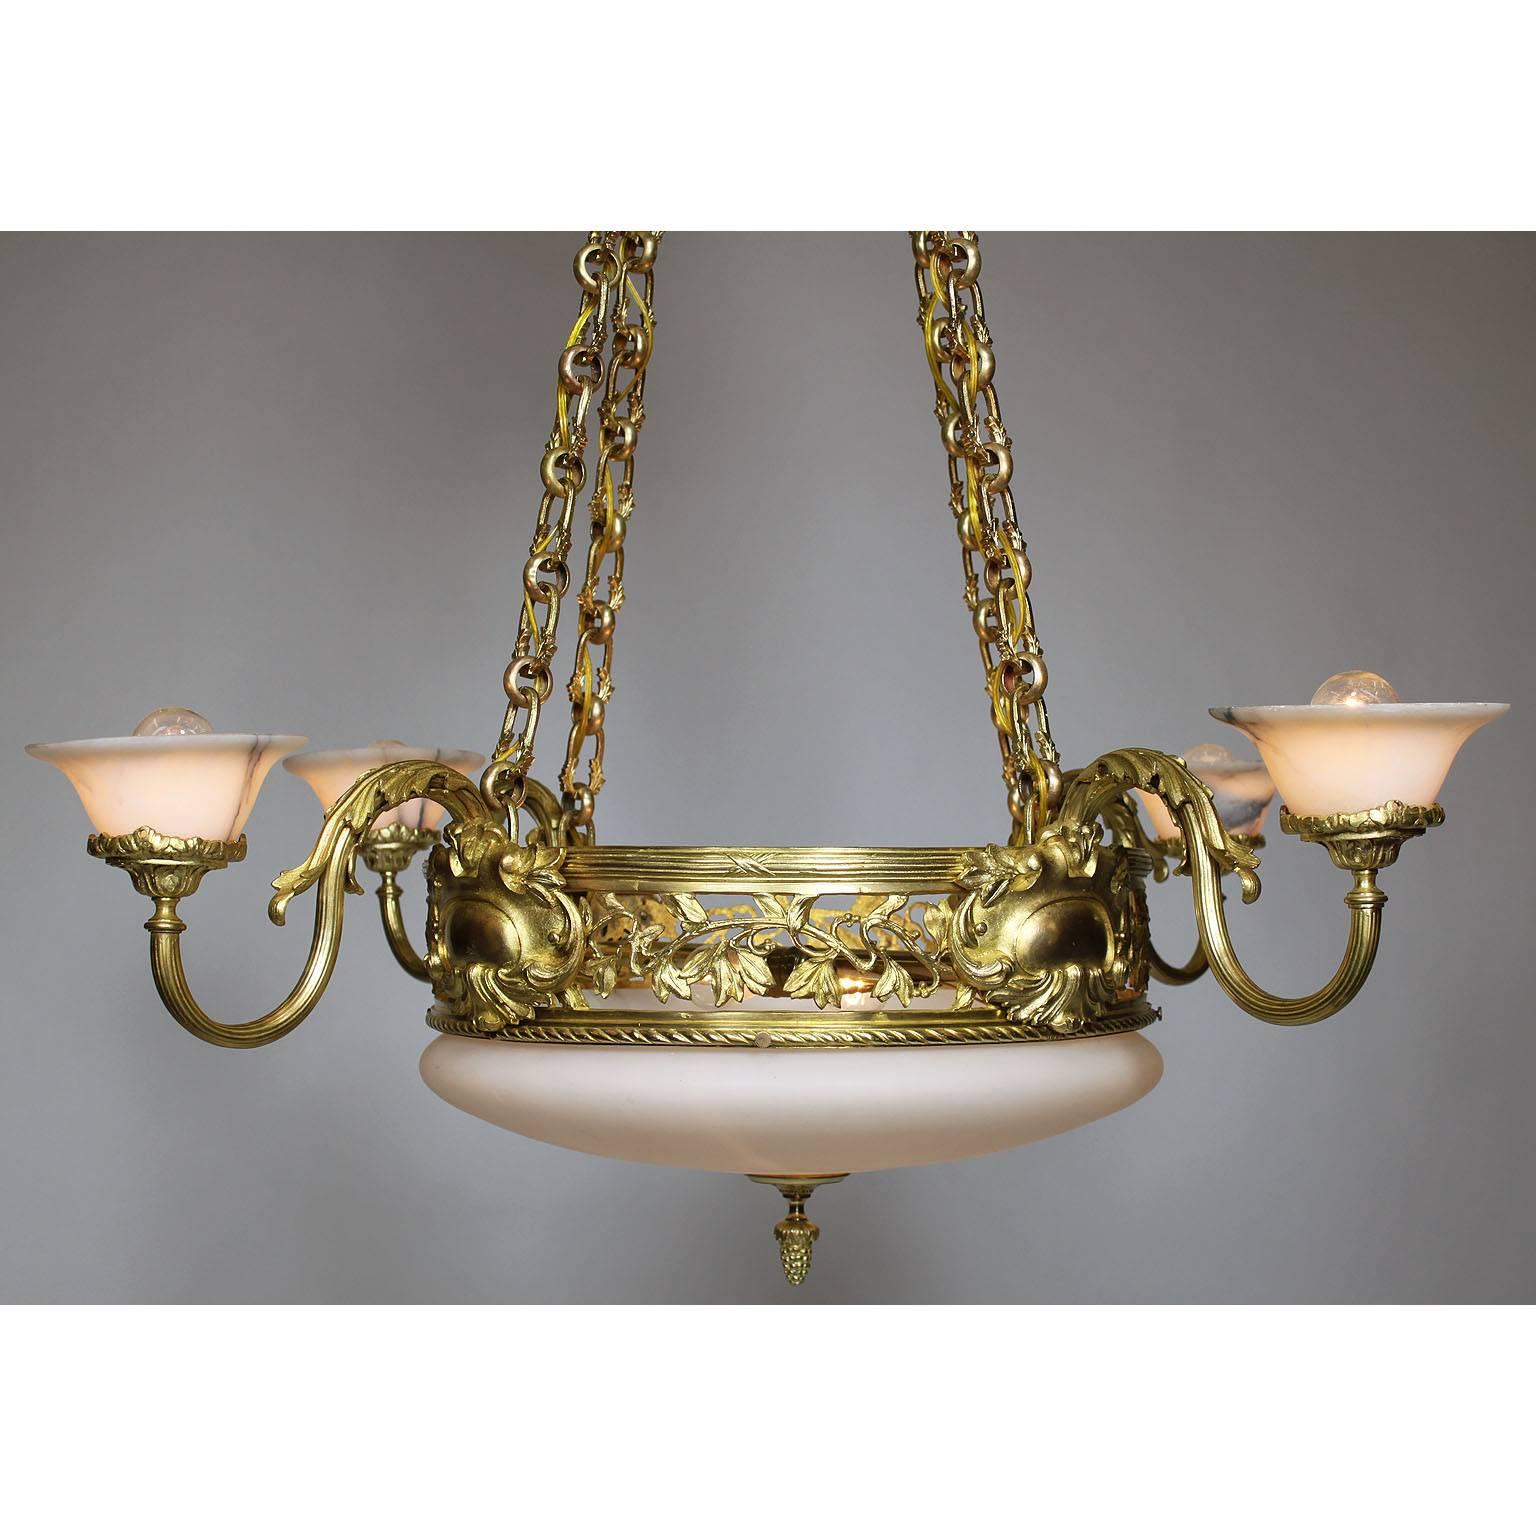 Neoclassical Revival French Neoclassical Style Gilt Bronze, Alabaster and Opaline Glass Chandelier  For Sale